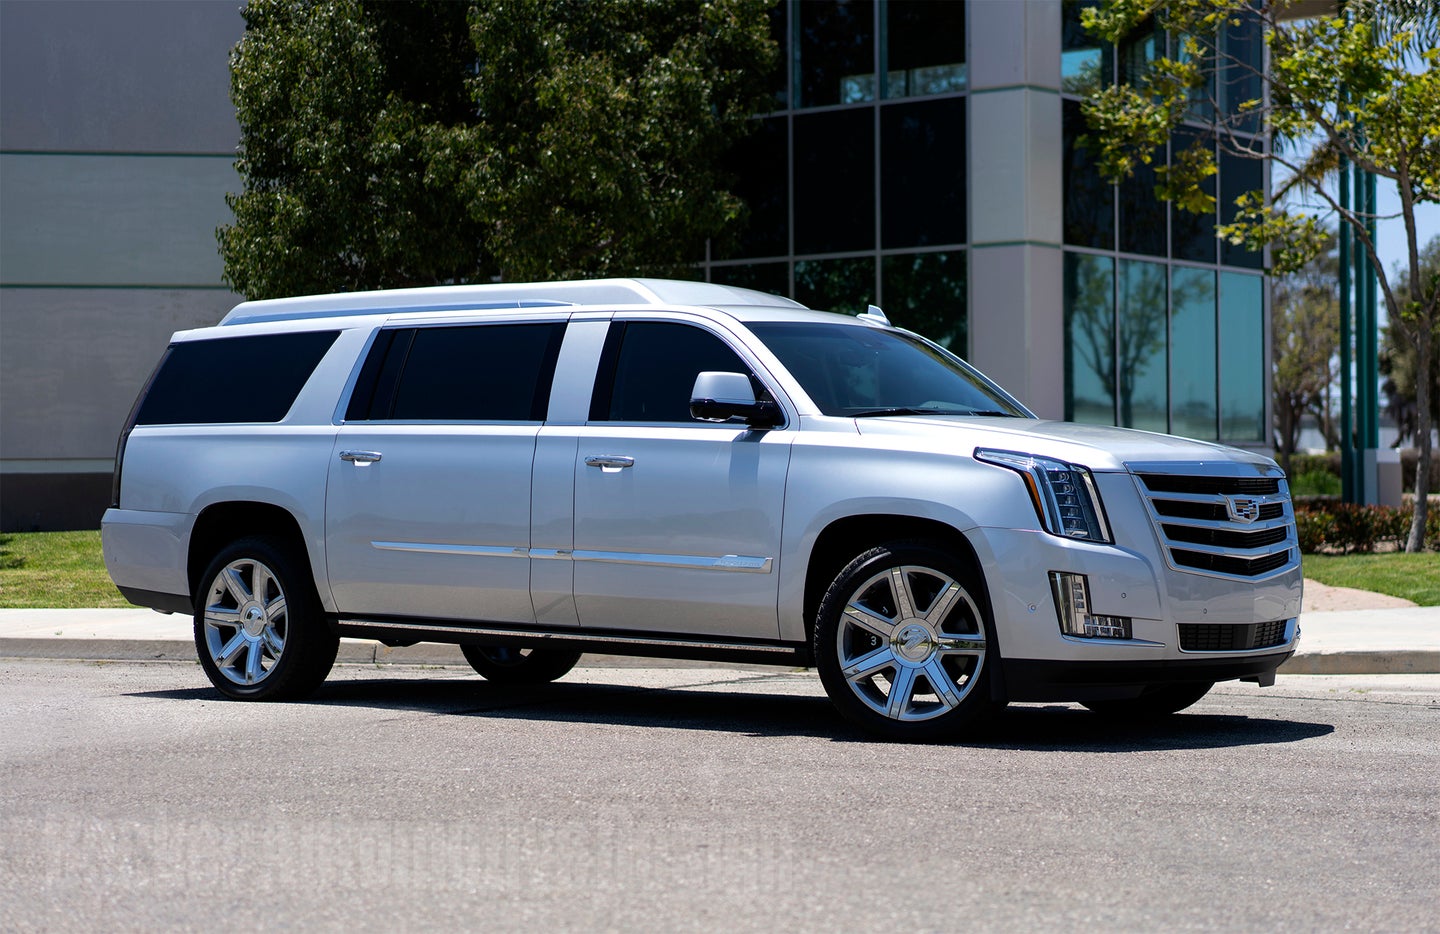 Tom Brady’s Stretched Cadillac Escalade ‘Mobile Office’ Will Set You Back $300,000